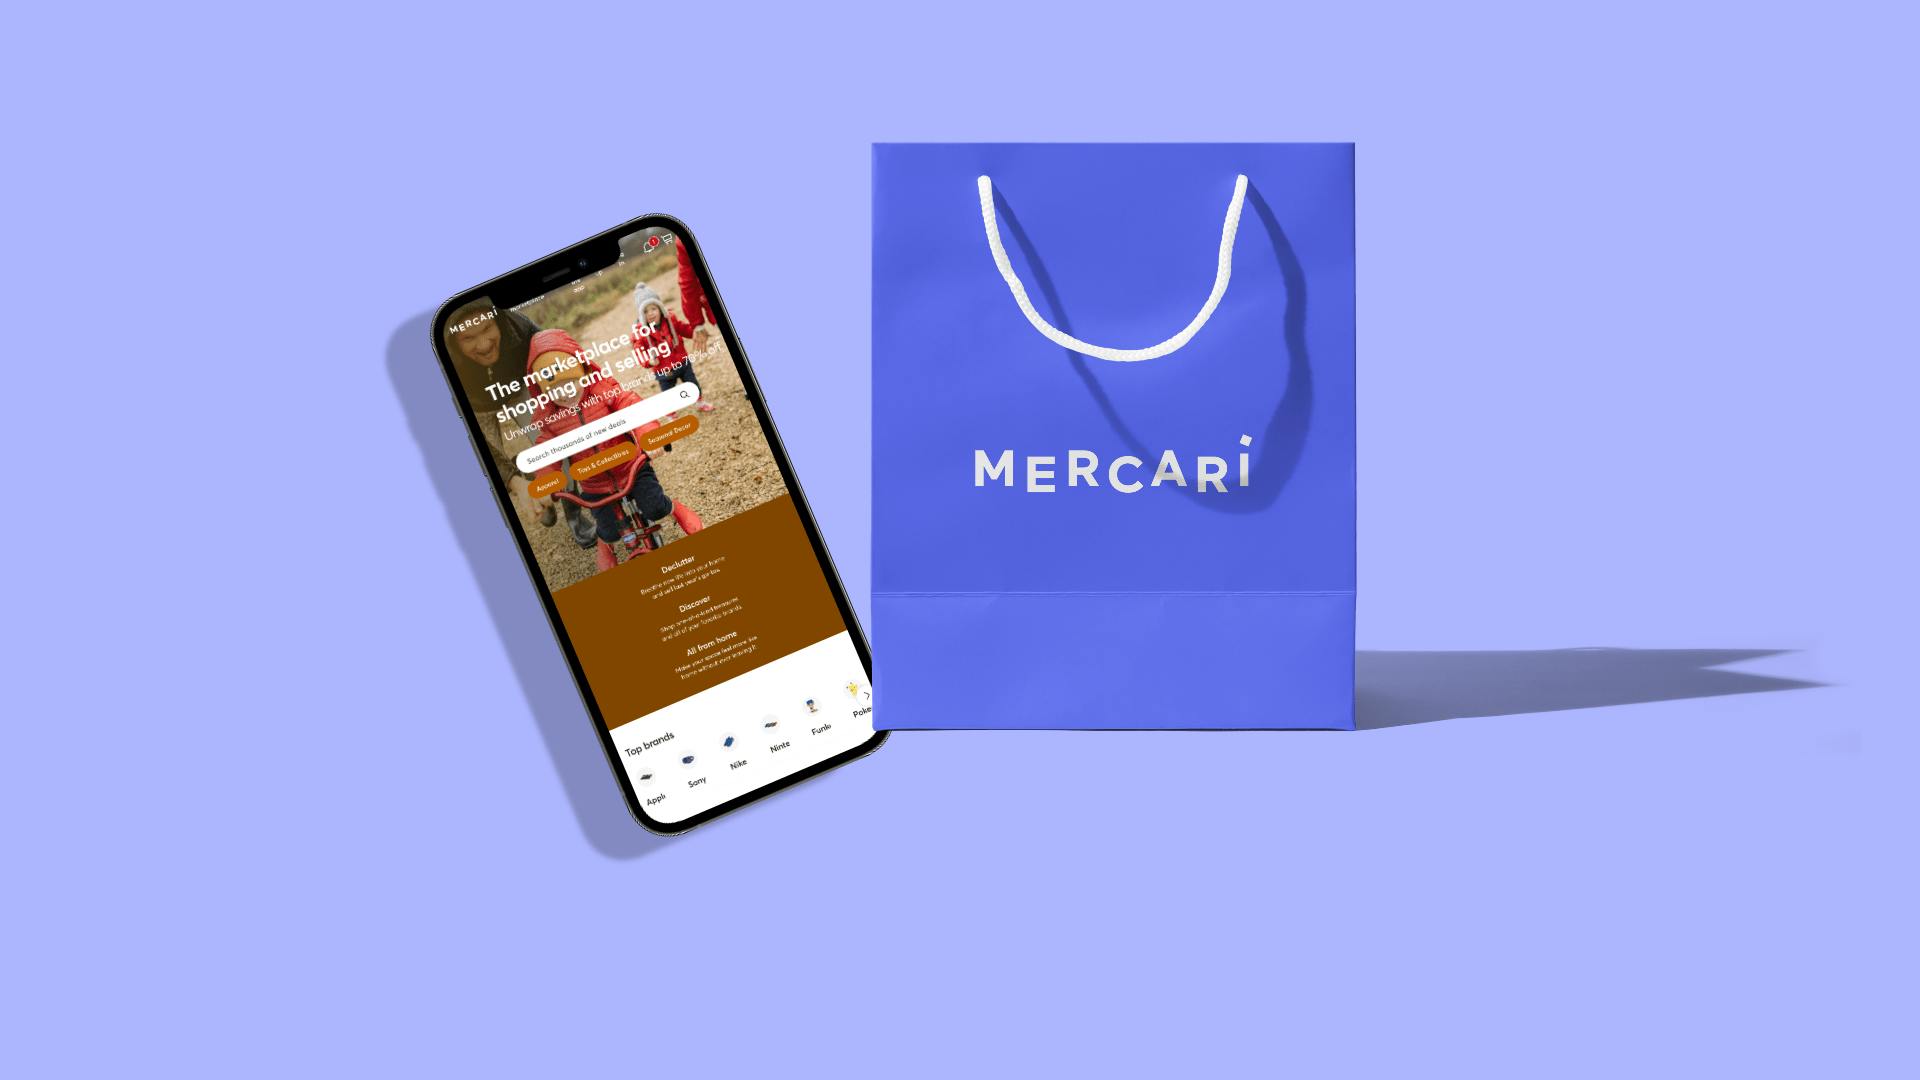 Shop from Mercari US, Forwardme.com ships to 220 countries